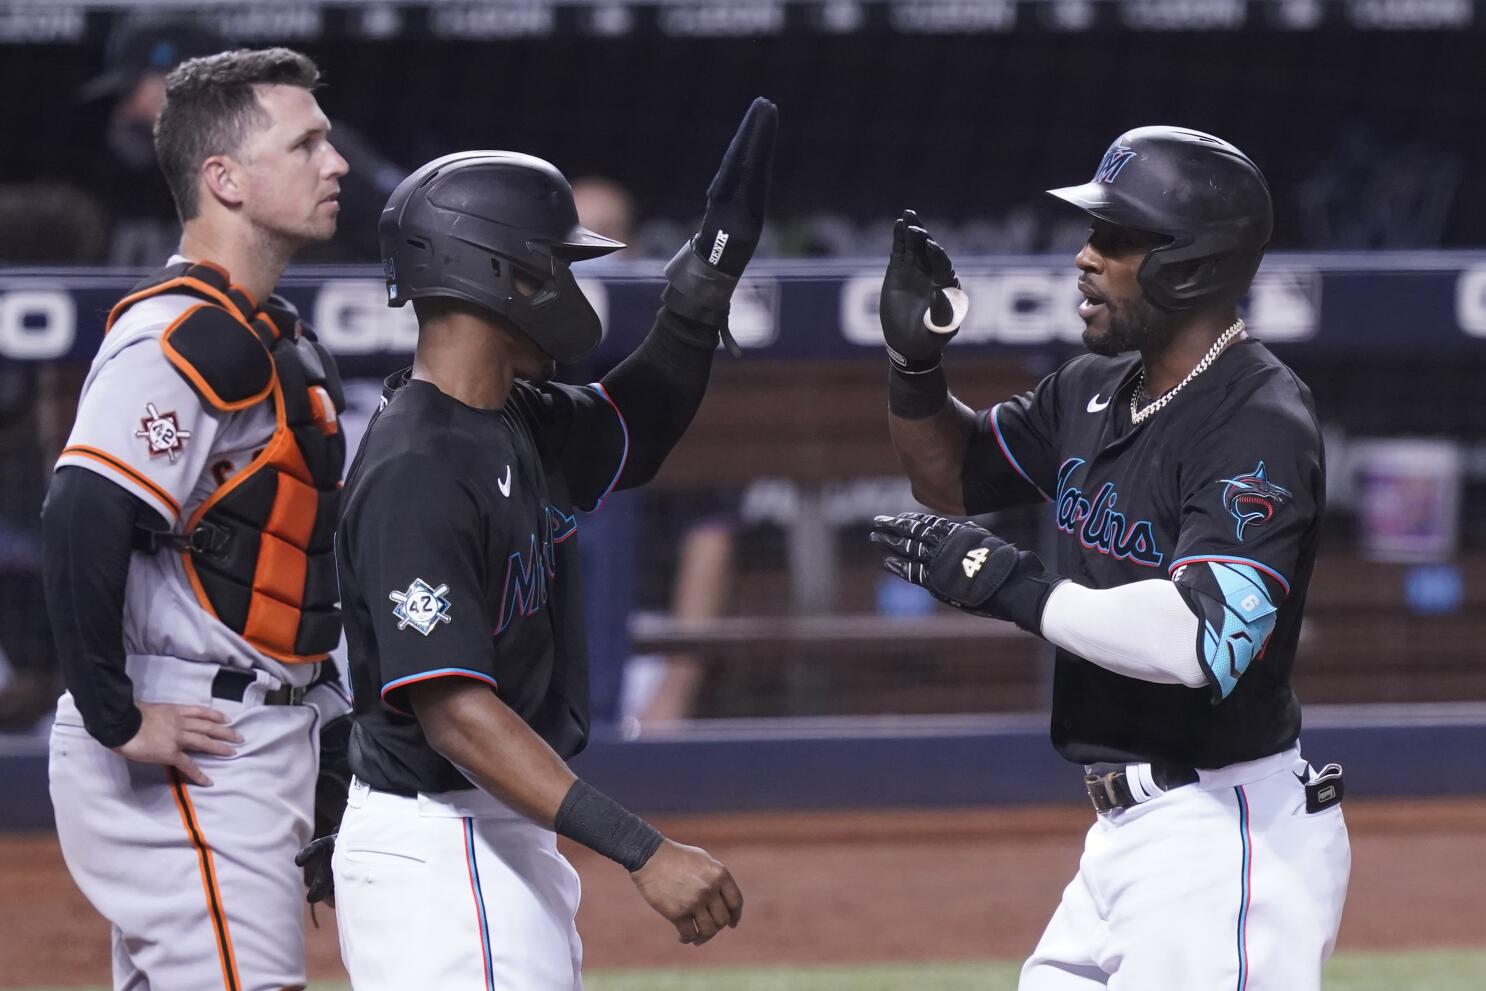 Marte's 3-run HR in 8th lifts Marlins to 4-1 win vs Giants - The